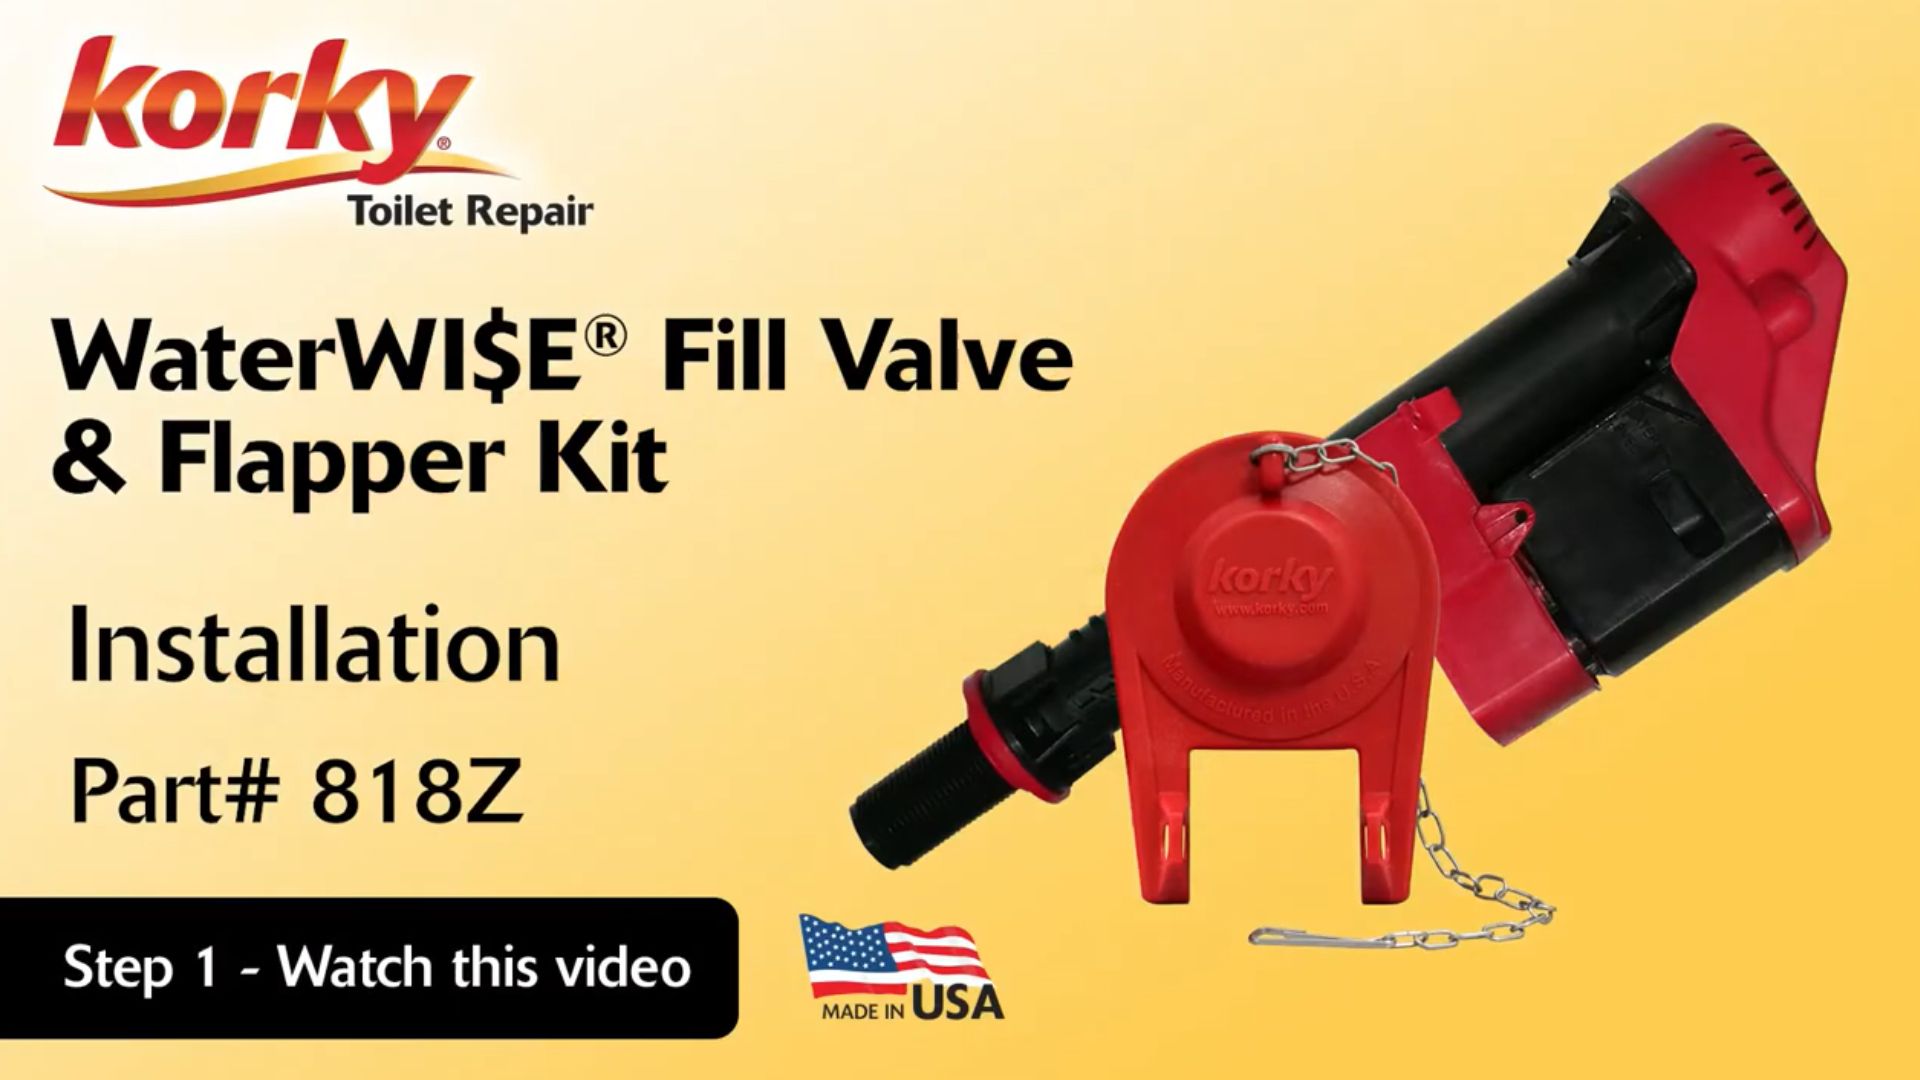 How to Install WaterWISE Toilet Fill Valve & 2